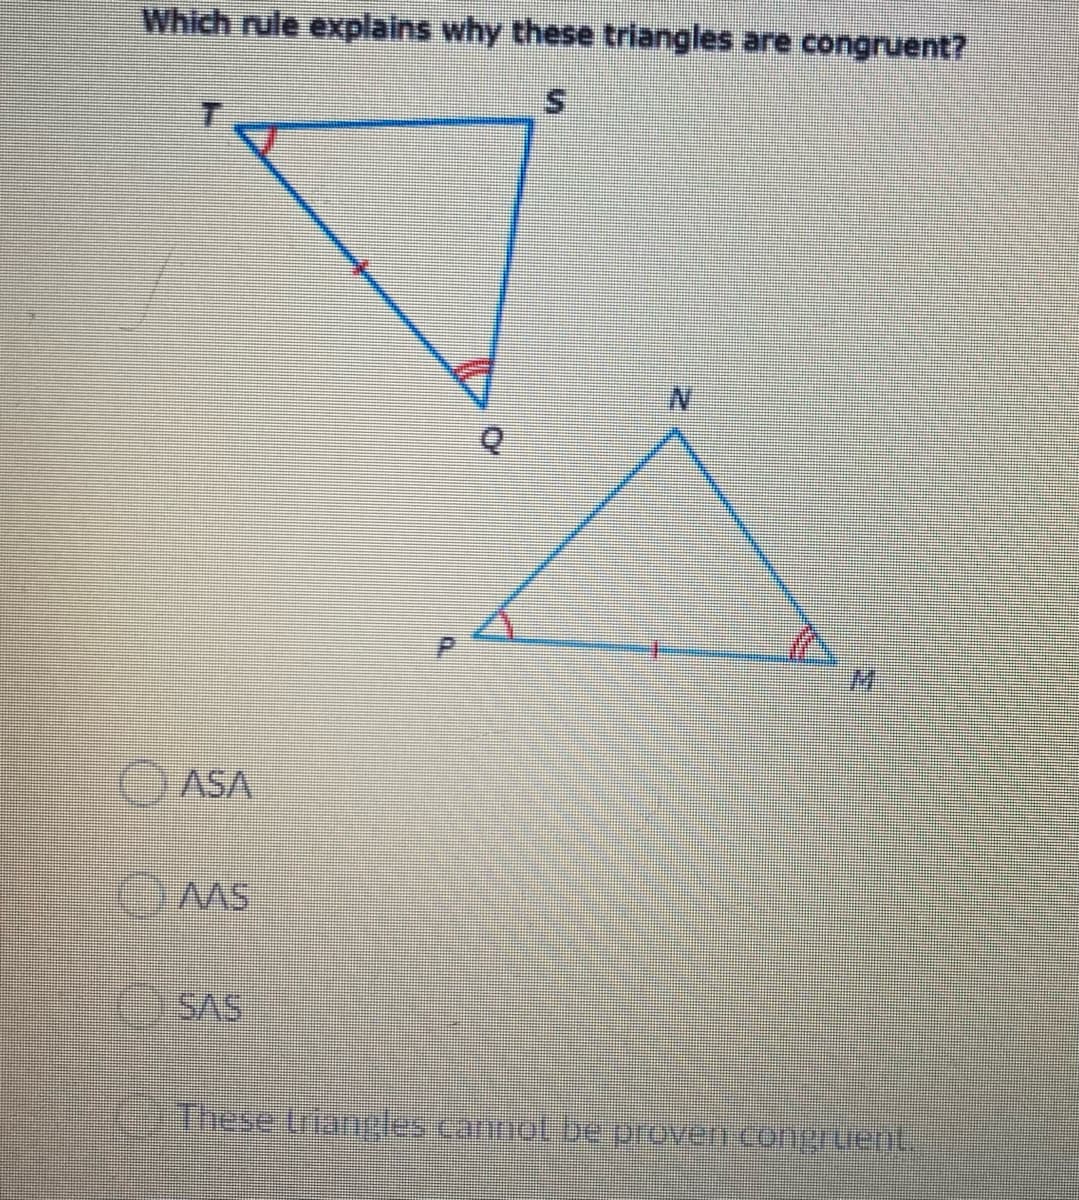 Which rule explains why these triangles are congruent?
5.
ASA
These triangcles cannot be provencomgruent,
